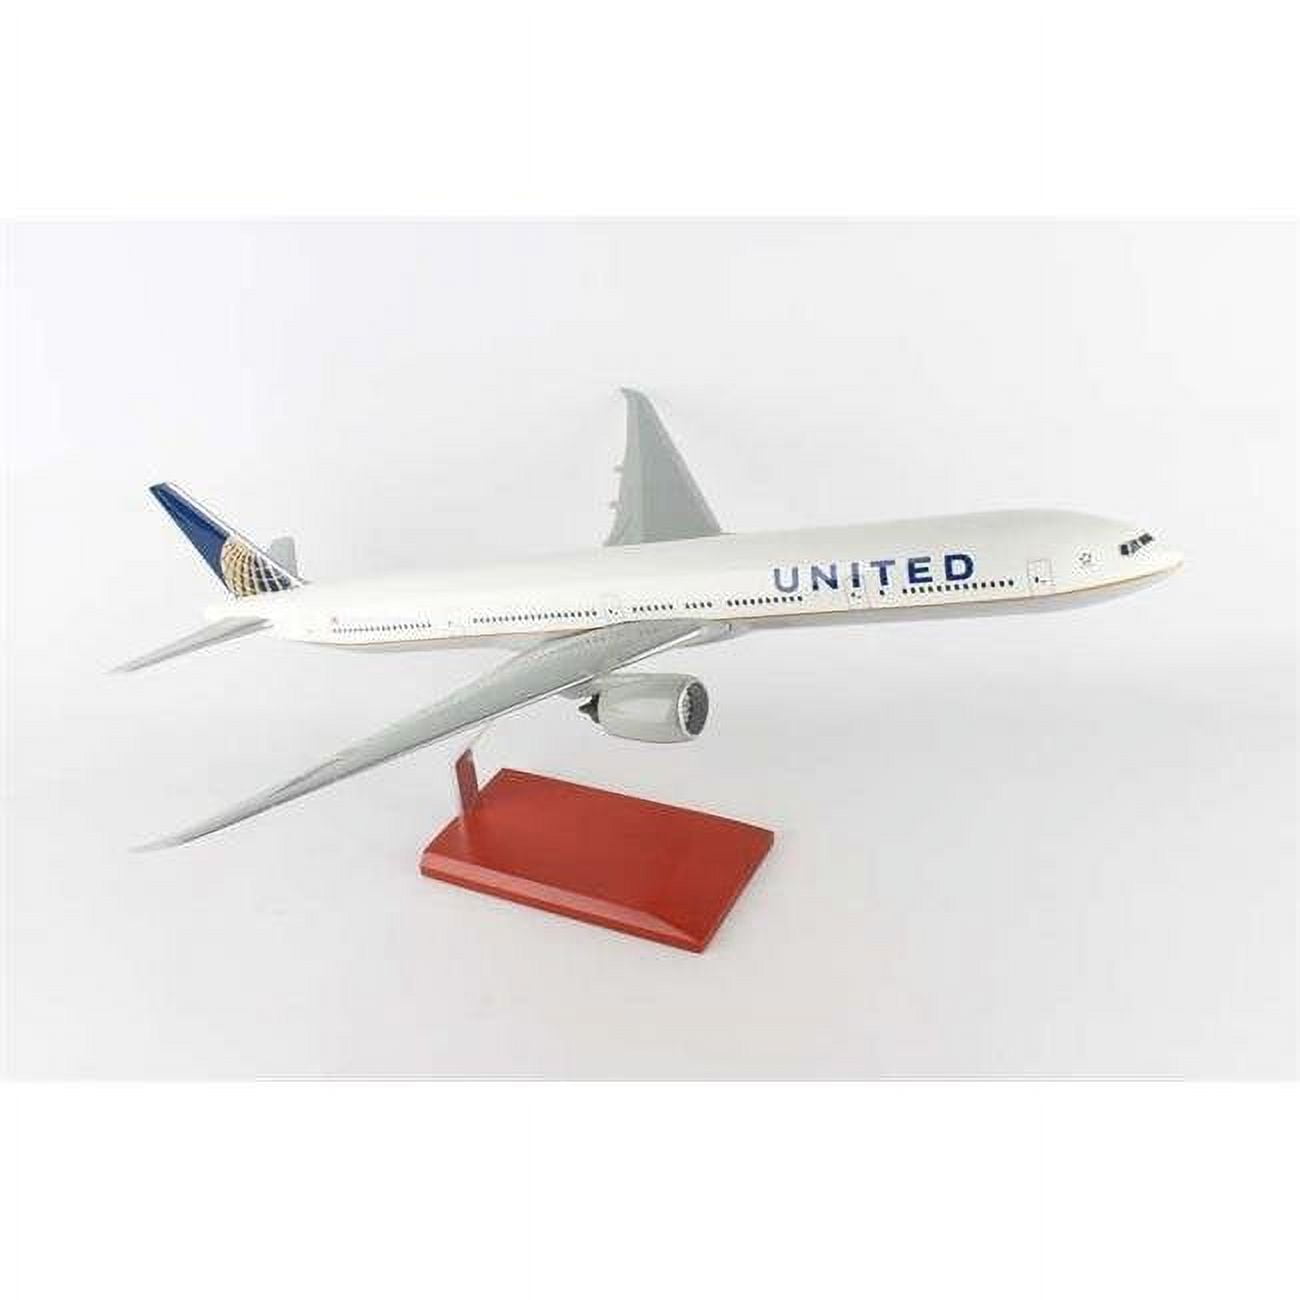 G60610 Executive United Airlines Post Merger B777-300 Model Airplane